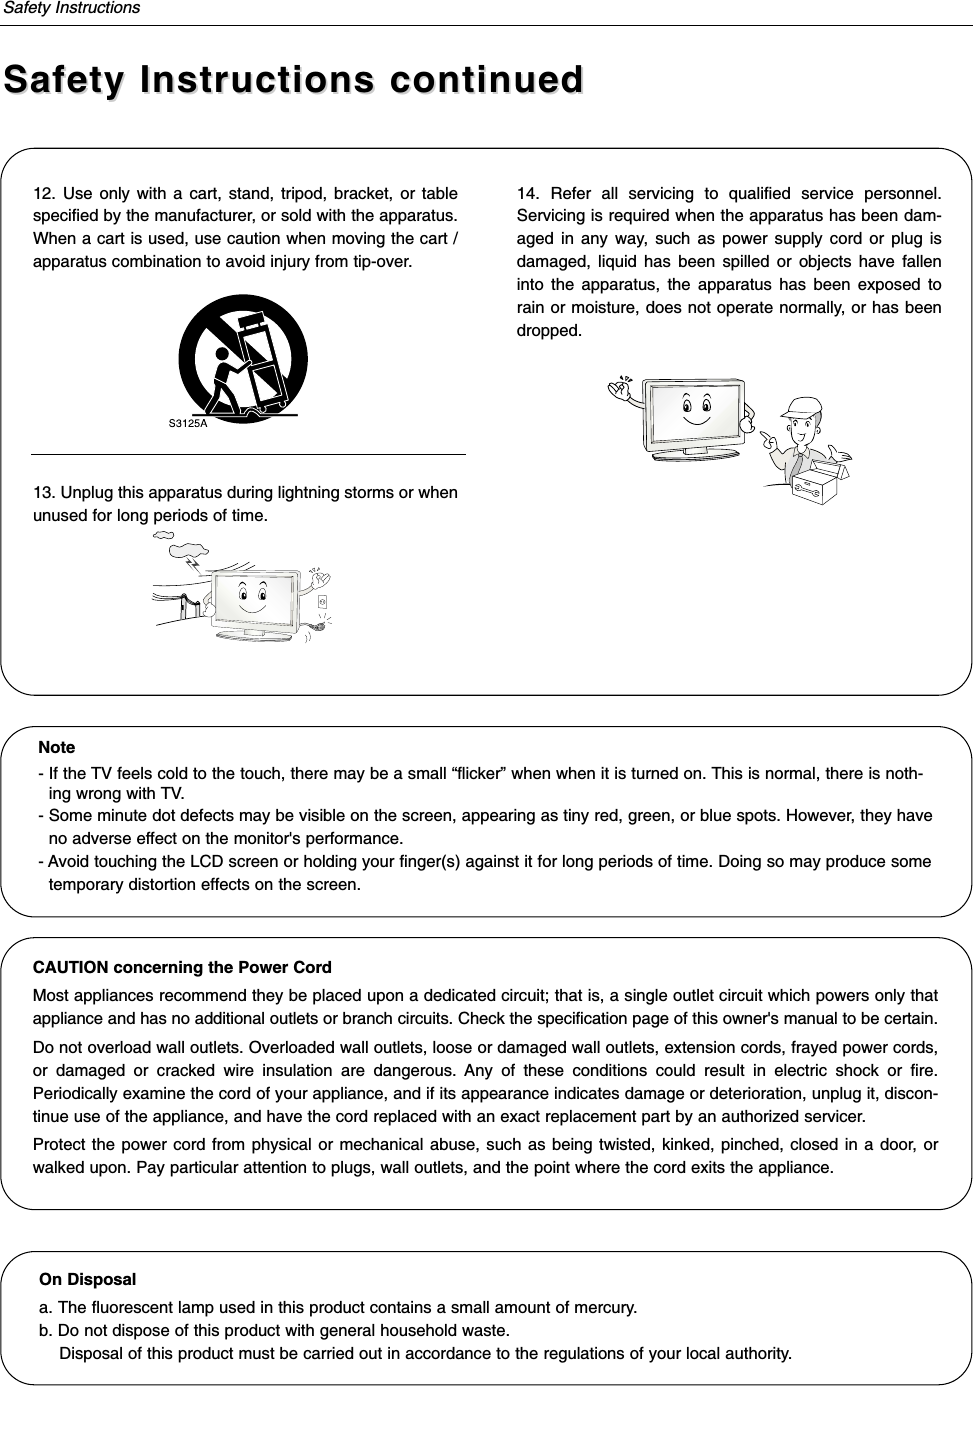 Safety InstructionsSafety Instructions continuedSafety Instructions continued12. Use only with a cart, stand, tripod, bracket, or tablespecified by the manufacturer, or sold with the apparatus.When a cart is used, use caution when moving the cart /apparatus combination to avoid injury from tip-over.13. Unplug this apparatus during lightning storms or whenunused for long periods of time.14. Refer all servicing to qualified service personnel.Servicing is required when the apparatus has been dam-aged in any way, such as power supply cord or plug isdamaged, liquid has been spilled or objects have falleninto the apparatus, the apparatus has been exposed torain or moisture, does not operate normally, or has beendropped.On Disposal a. The fluorescent lamp used in this product contains a small amount of mercury.b. Do not dispose of this product with general household waste.Disposal of this product must be carried out in accordance to the regulations of your local authority.Note- If the TV feels cold to the touch, there may be a small “flicker” when when it is turned on. This is normal, there is noth-ing wrong with TV.- Some minute dot defects may be visible on the screen, appearing as tiny red, green, or blue spots. However, they haveno adverse effect on the monitor&apos;s performance.- Avoid touching the LCD screen or holding your finger(s) against it for long periods of time. Doing so may produce sometemporary distortion effects on the screen.CAUTION concerning the Power CordMost appliances recommend they be placed upon a dedicated circuit; that is, a single outlet circuit which powers only thatappliance and has no additional outlets or branch circuits. Check the specification page of this owner&apos;s manual to be certain.Do not overload wall outlets. Overloaded wall outlets, loose or damaged wall outlets, extension cords, frayed power cords,or damaged or cracked wire insulation are dangerous. Any of these conditions could result in electric shock or fire.Periodically examine the cord of your appliance, and if its appearance indicates damage or deterioration, unplug it, discon-tinue use of the appliance, and have the cord replaced with an exact replacement part by an authorized servicer.Protect the power cord from physical or mechanical abuse, such as being twisted, kinked, pinched, closed in a door, orwalked upon. Pay particular attention to plugs, wall outlets, and the point where the cord exits the appliance.